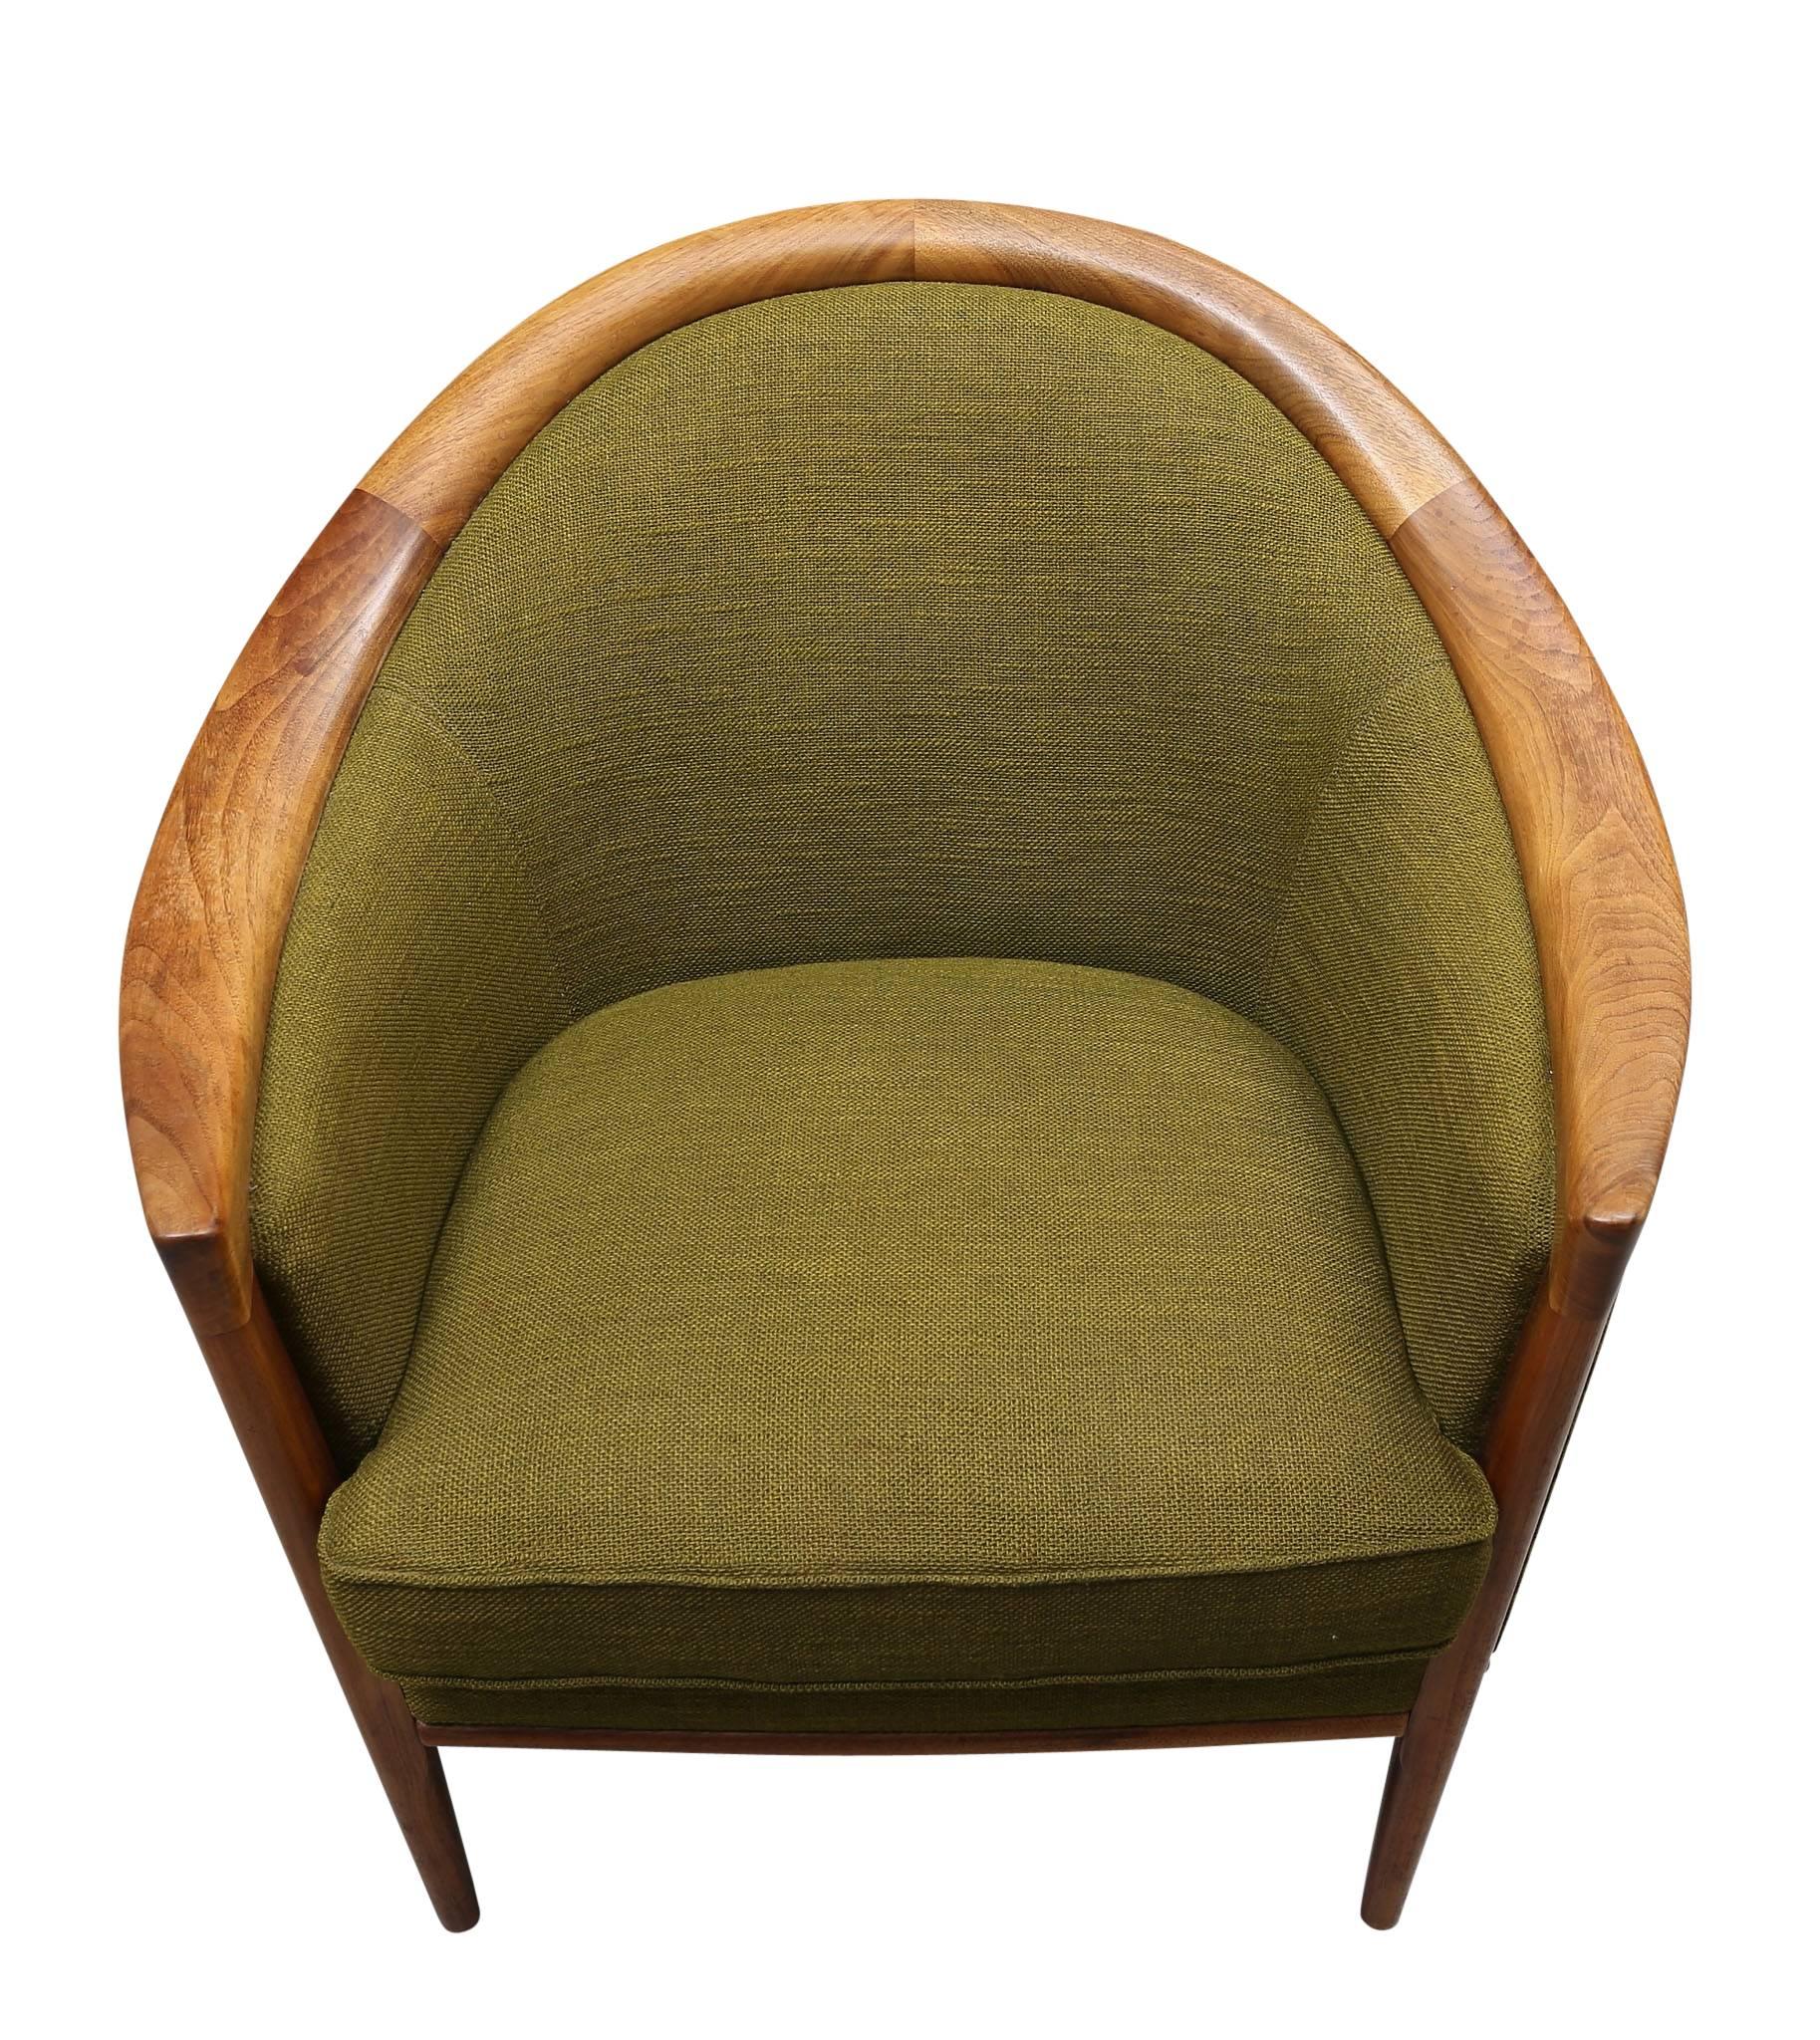 Comprising a sleek three-seat sofa and a matching armchair, the group is offered in its original, vintage green tweed fabric. An additional pair of matching chairs are also available. Re-upholstery is suggested, at an additional charge; however,